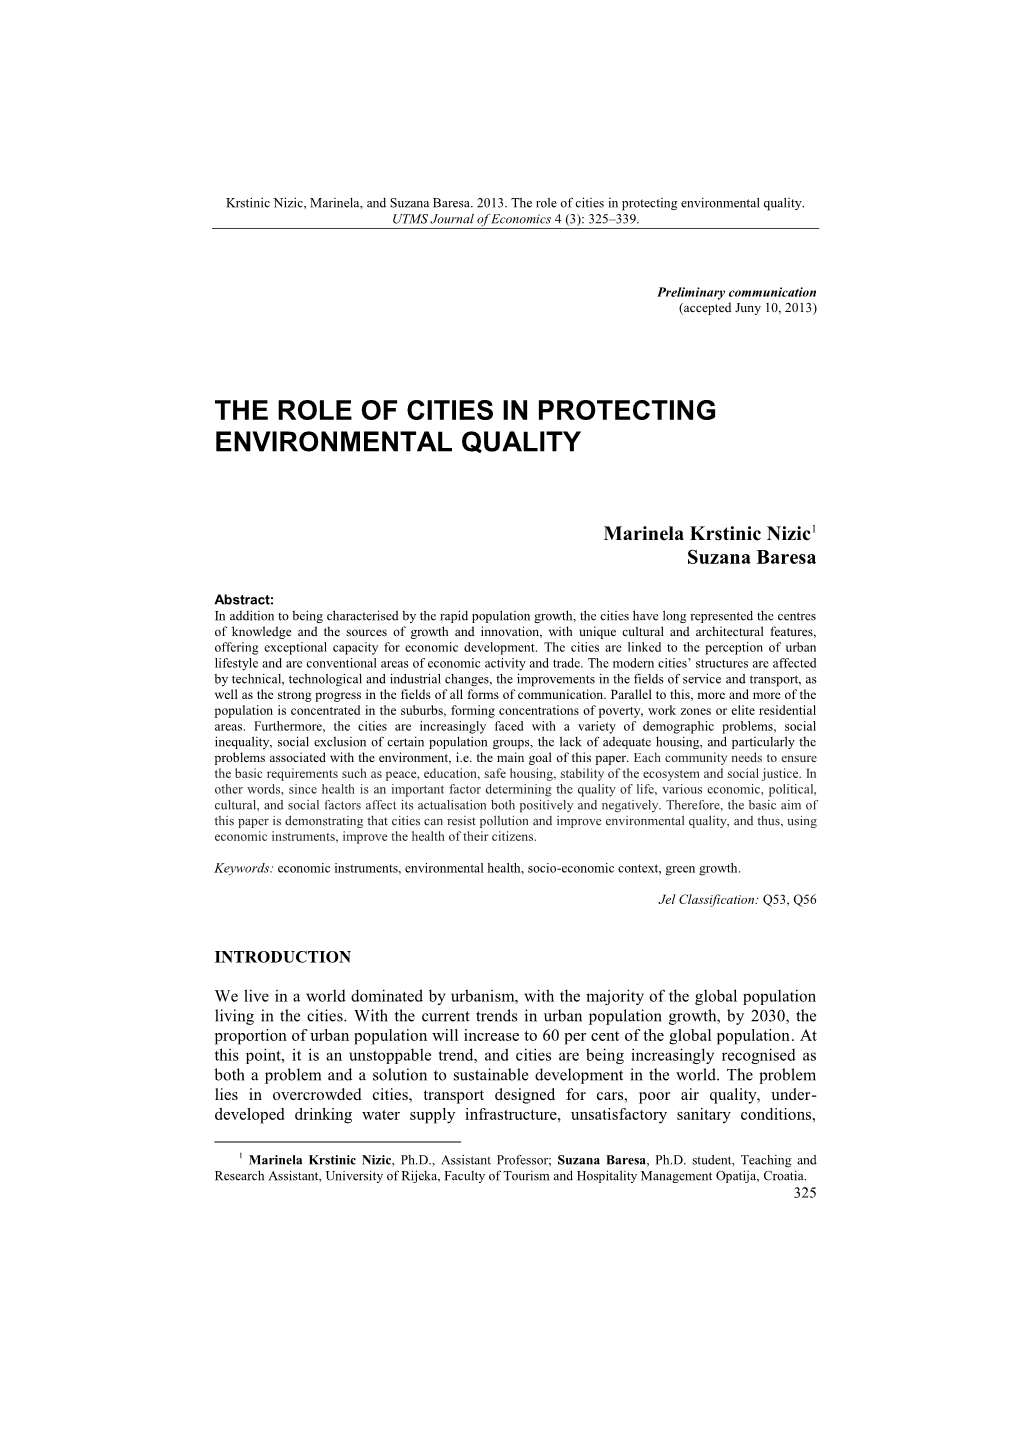 The Role of Cities in Protecting Environmental Quality